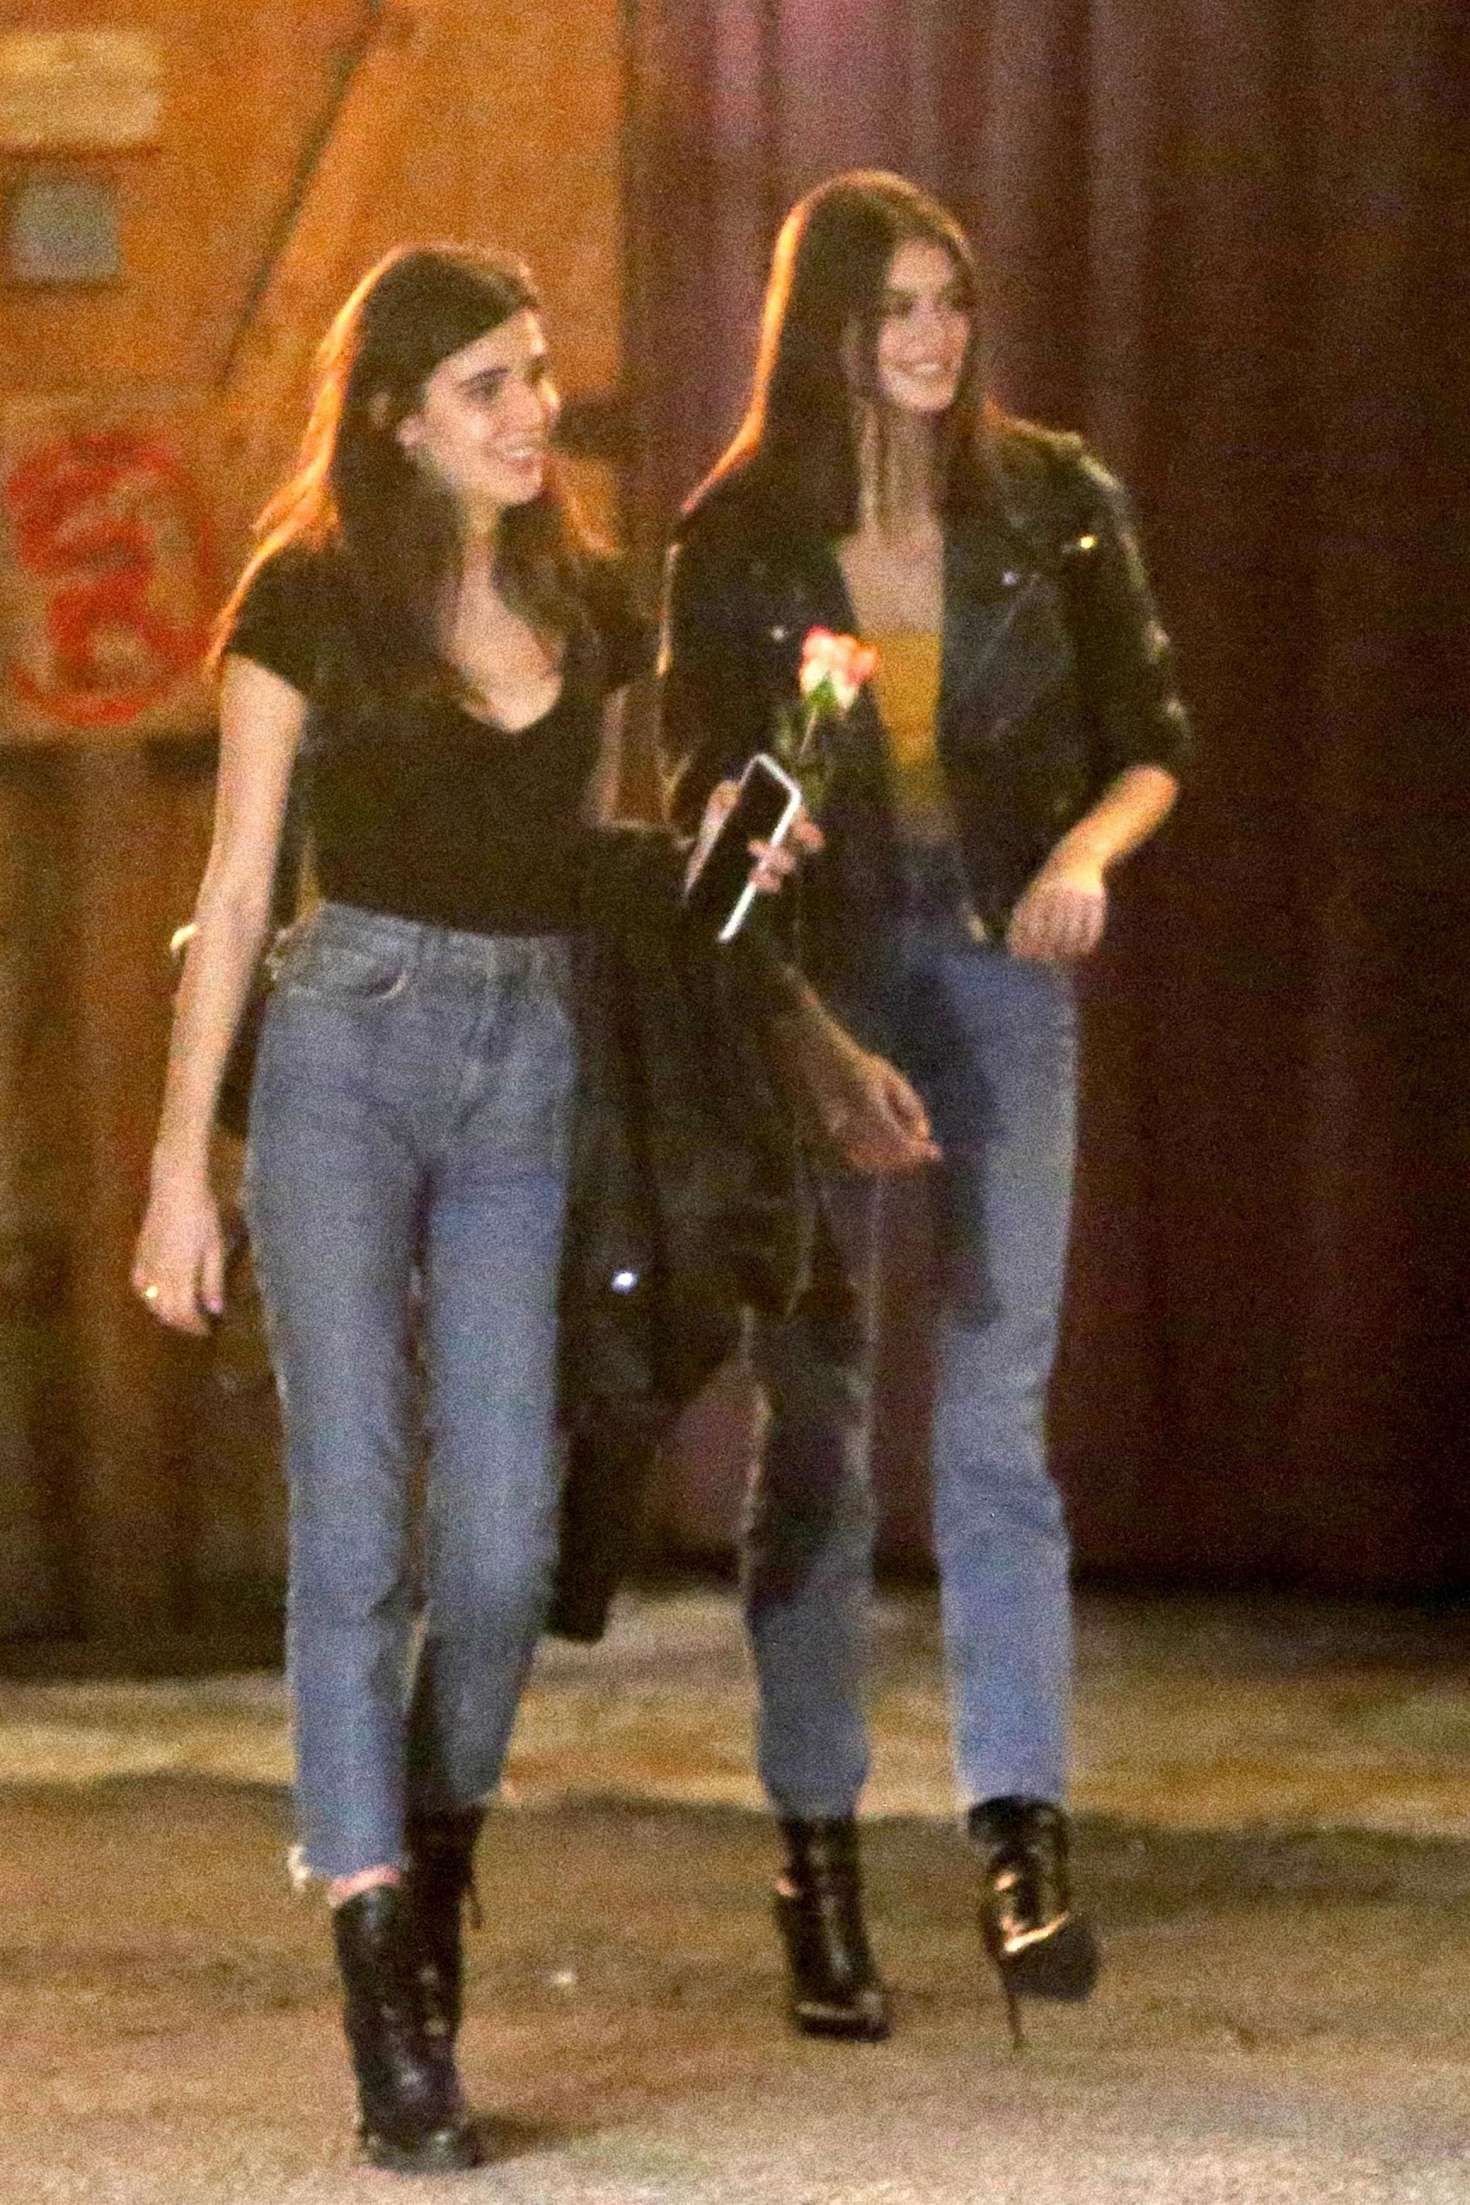 Kaia Gerber at The Saddle Ranch in West Hollywood